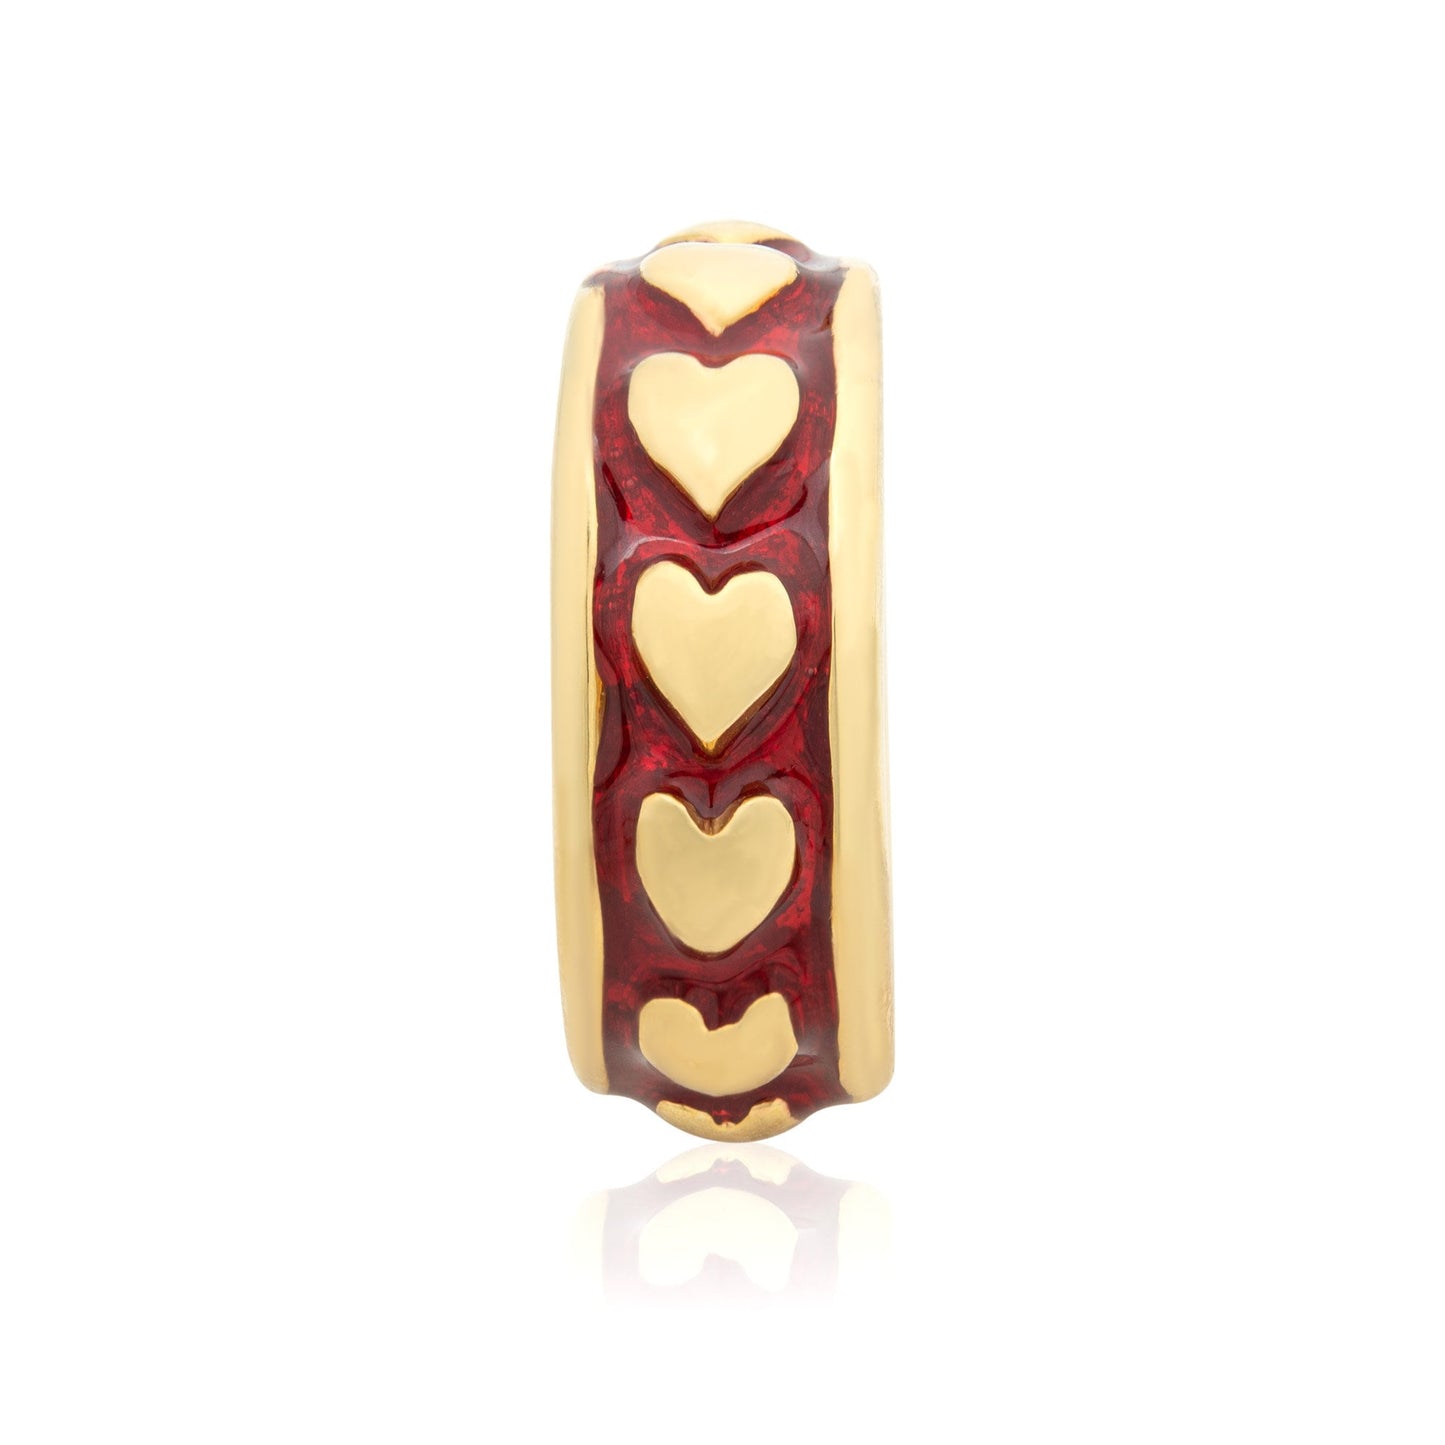 Vintage Ring 1980's Heart Band Ring 18k Gold  R3717 - Limited Stock - Never Worn